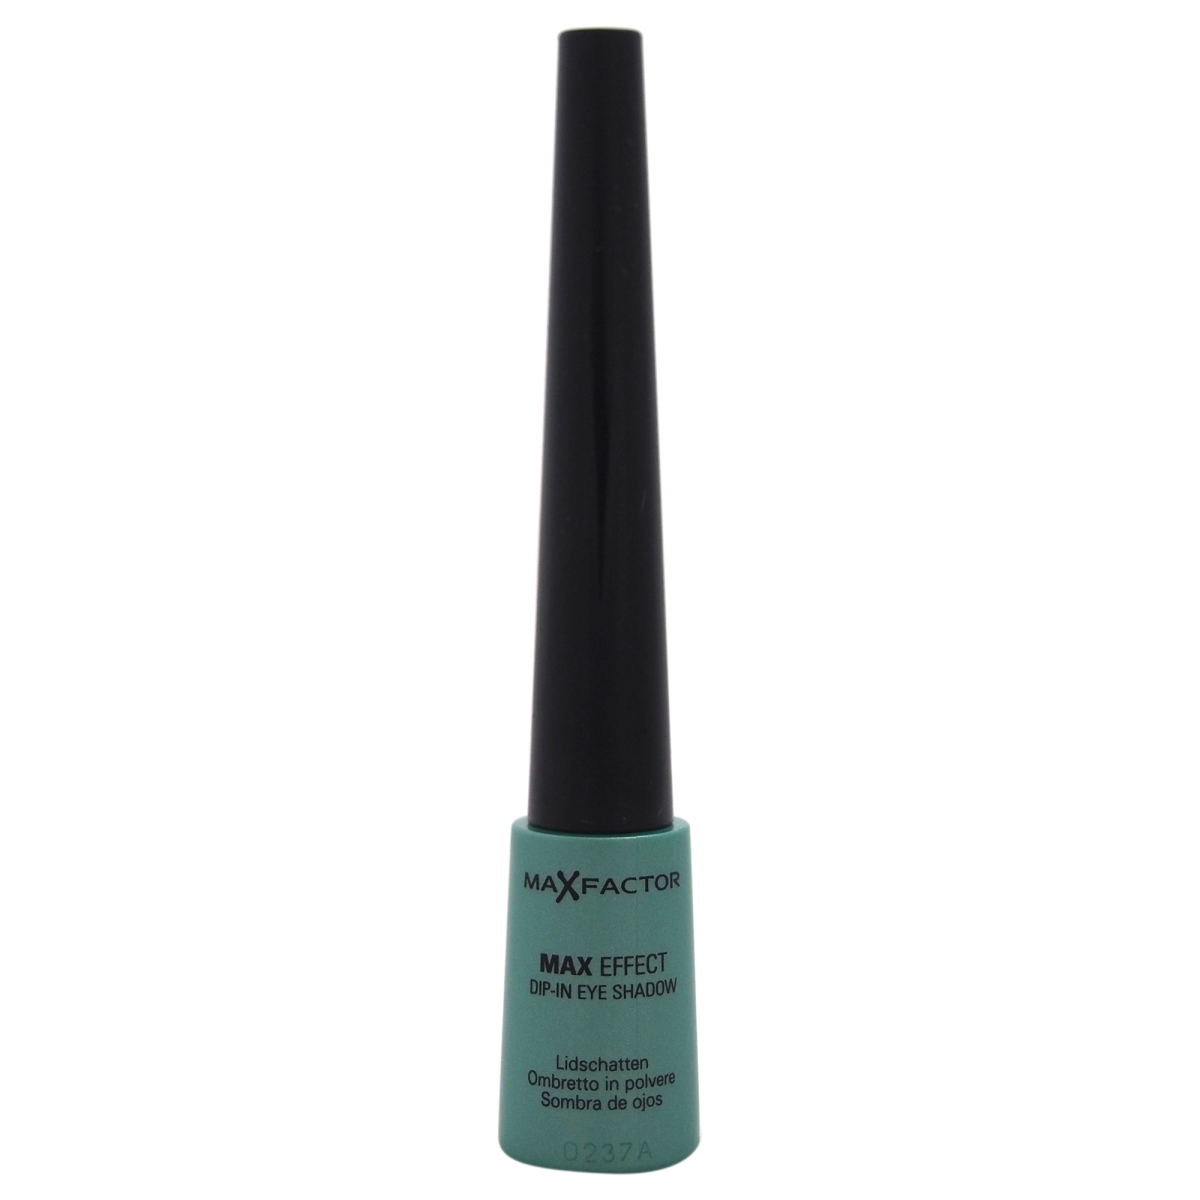 W-c-4564 1 G No. 07 Max Effect Dip-in Eye Shadow - Vibrant Turquoise For Women